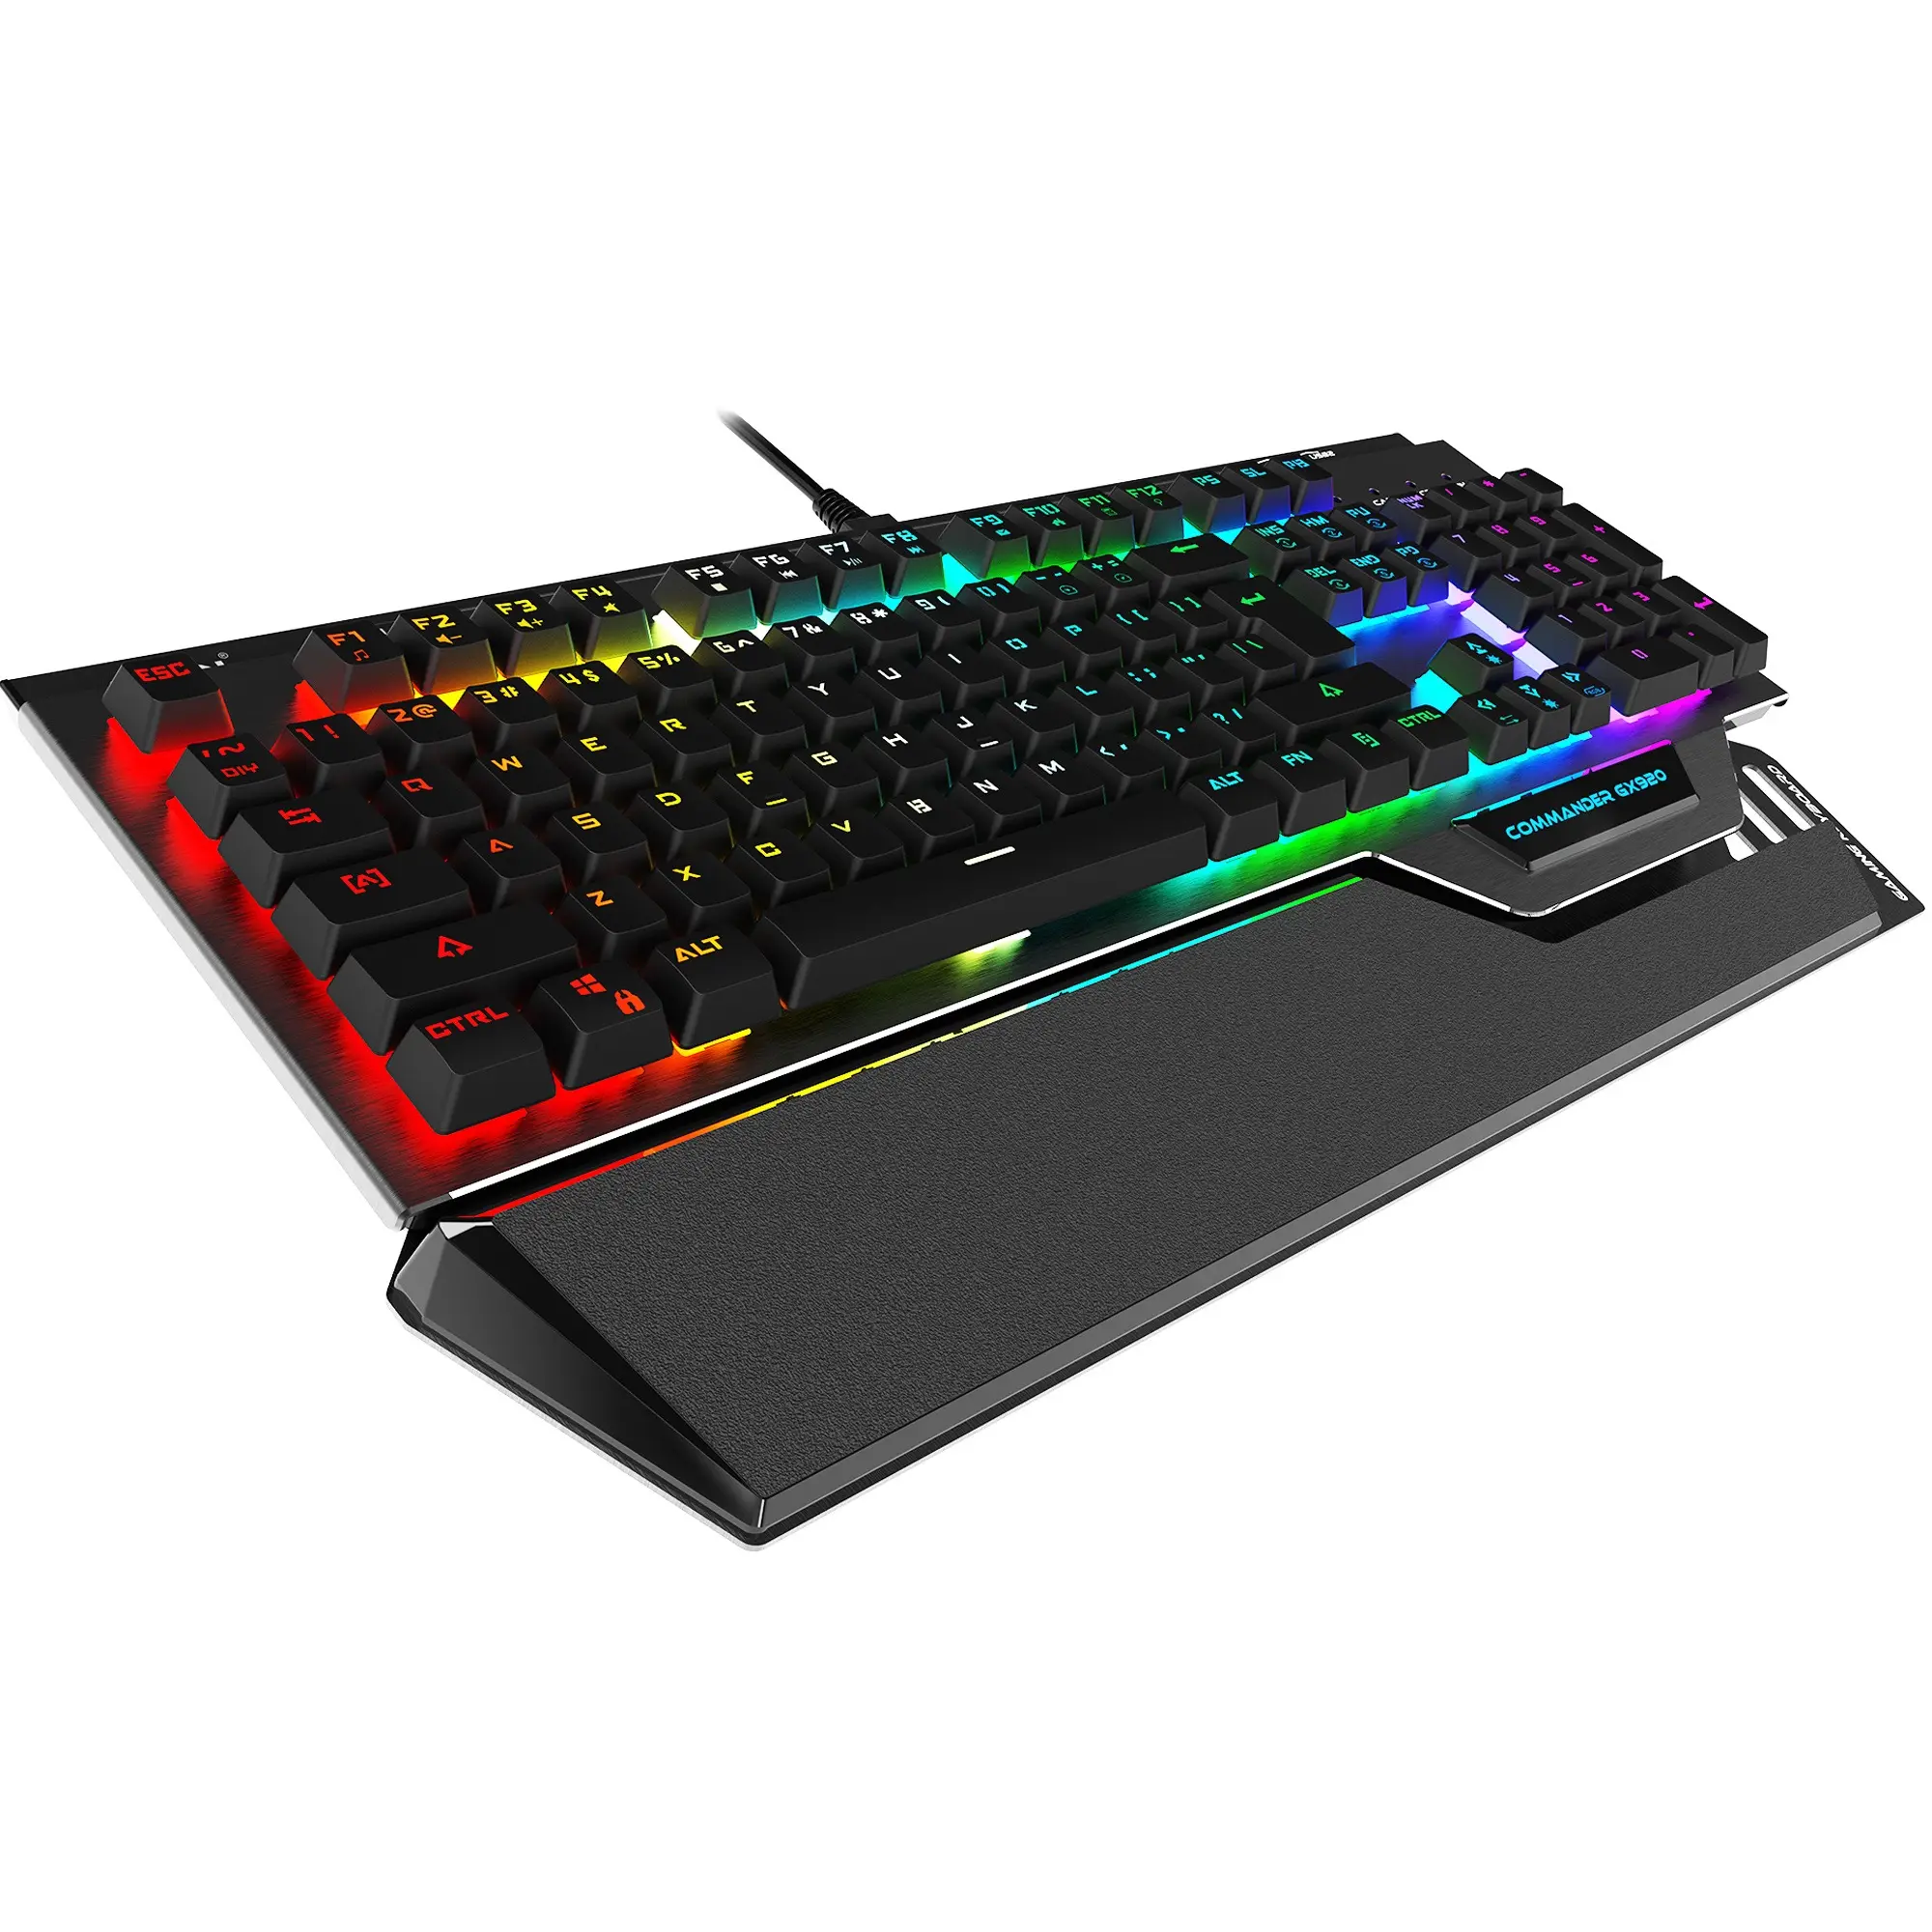 GX920 RGB mechanical gaming keyboard,waterproof,two USB ports,blue switches,Customize Color Backlit